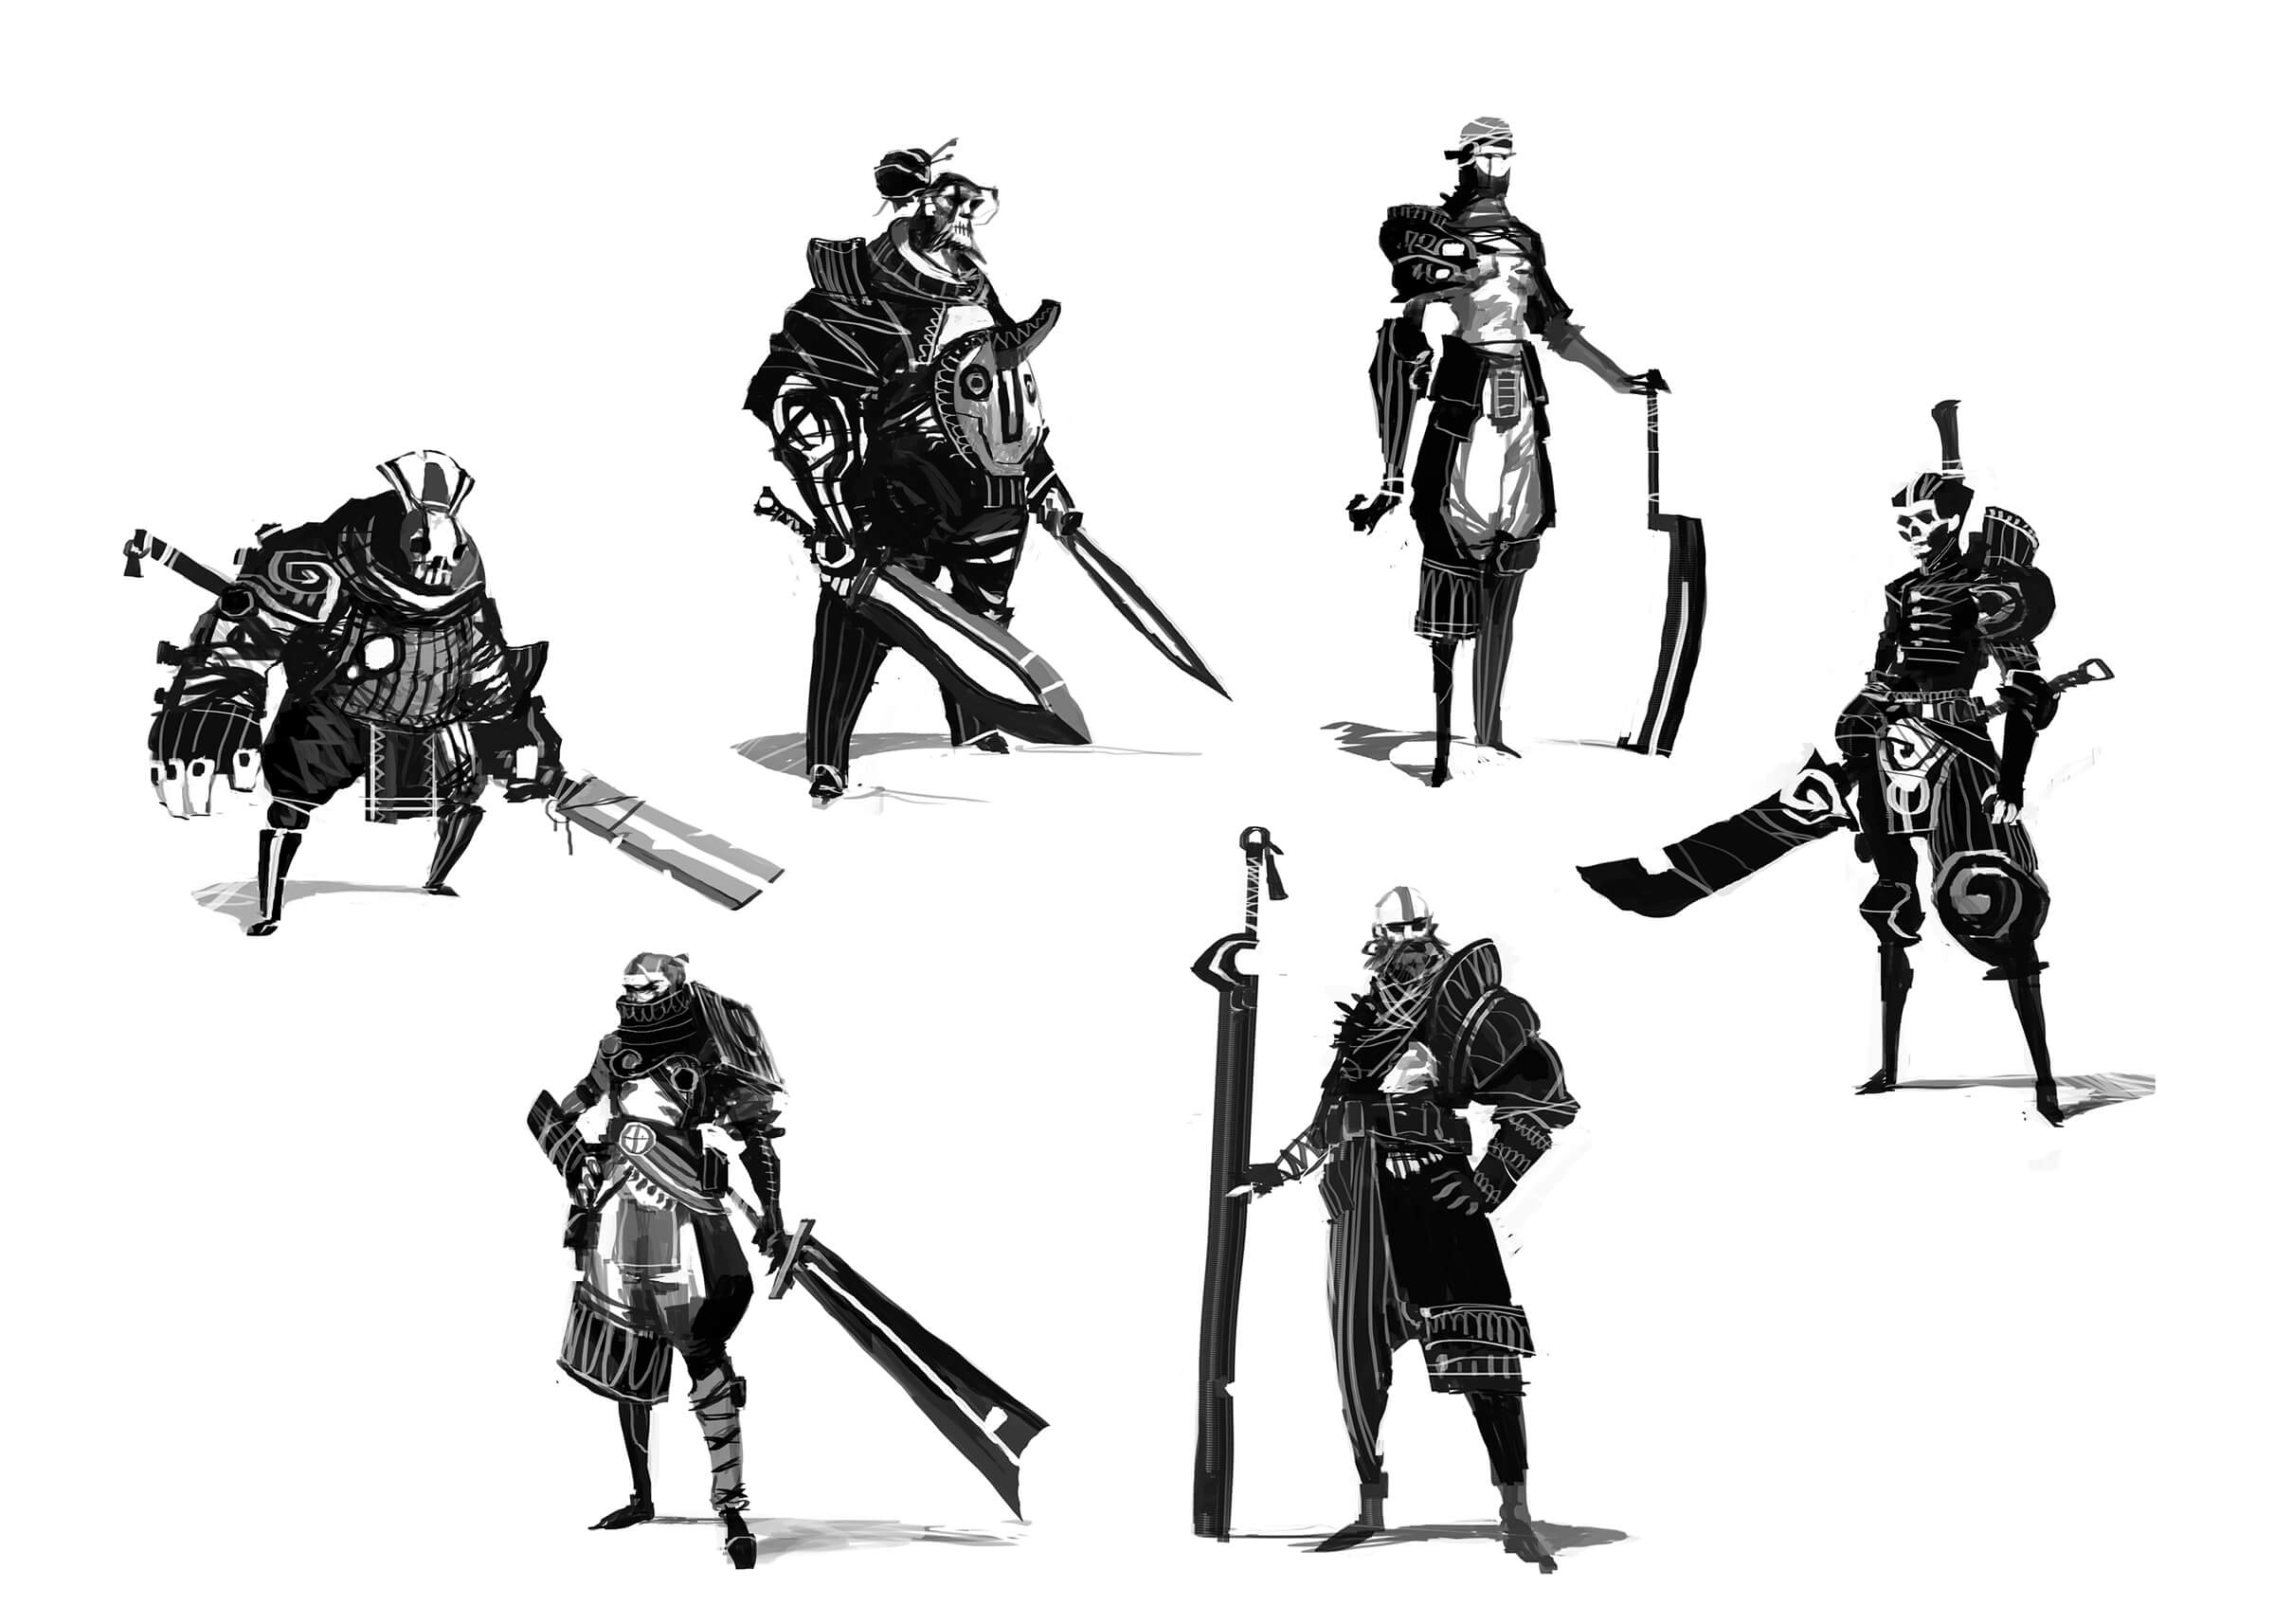 Black-and-white sketches of fearsome warriors posing with their oversized swords in ornate battle gear.